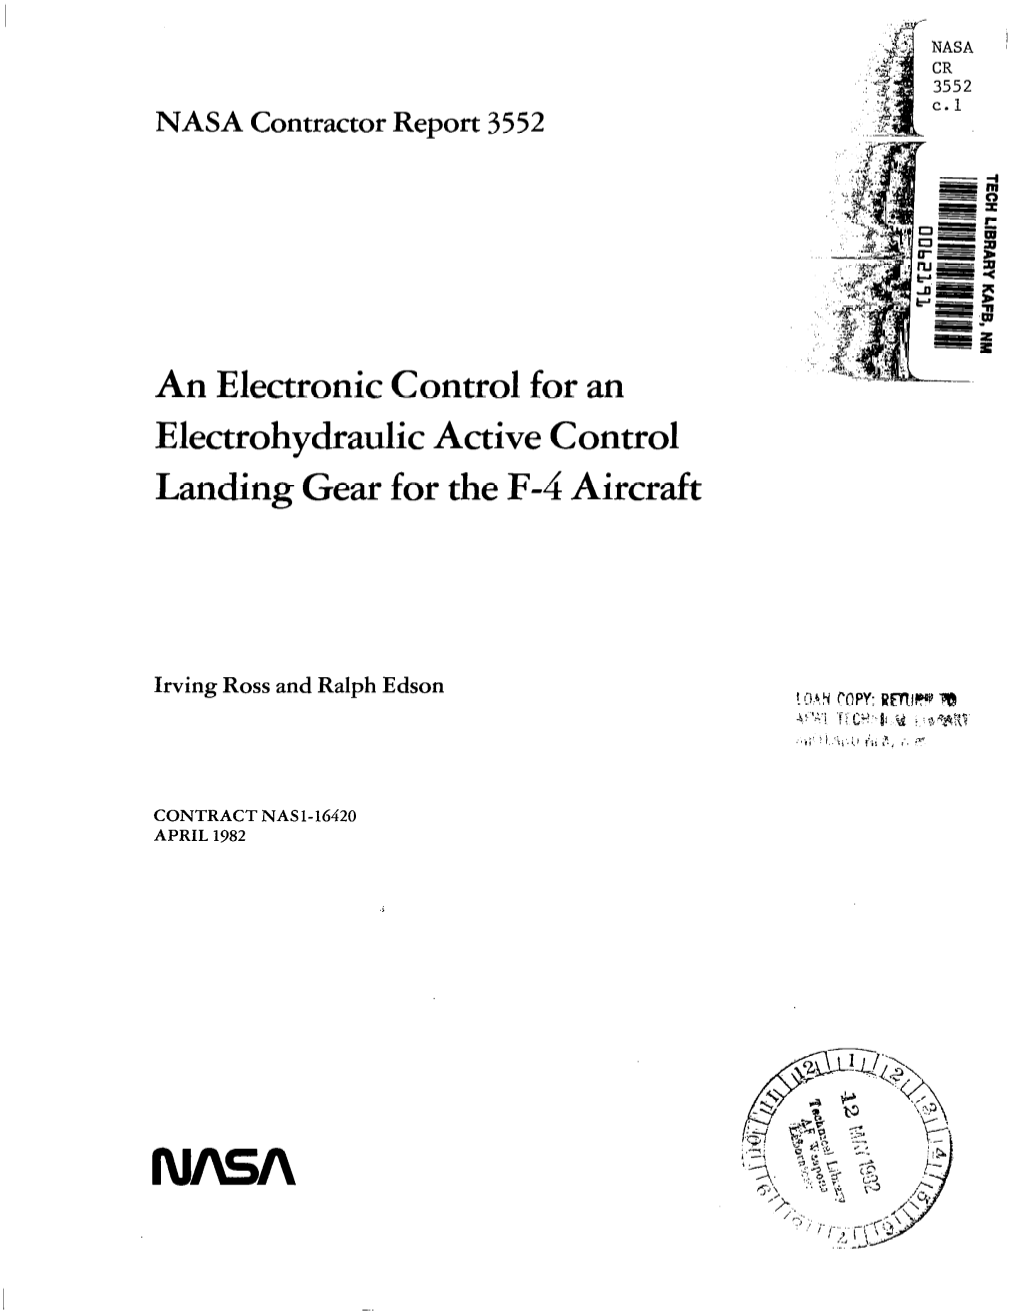 An Electronic Control for an Electrohydraulic Active Control Landing Gear for the F-4 Aircraft